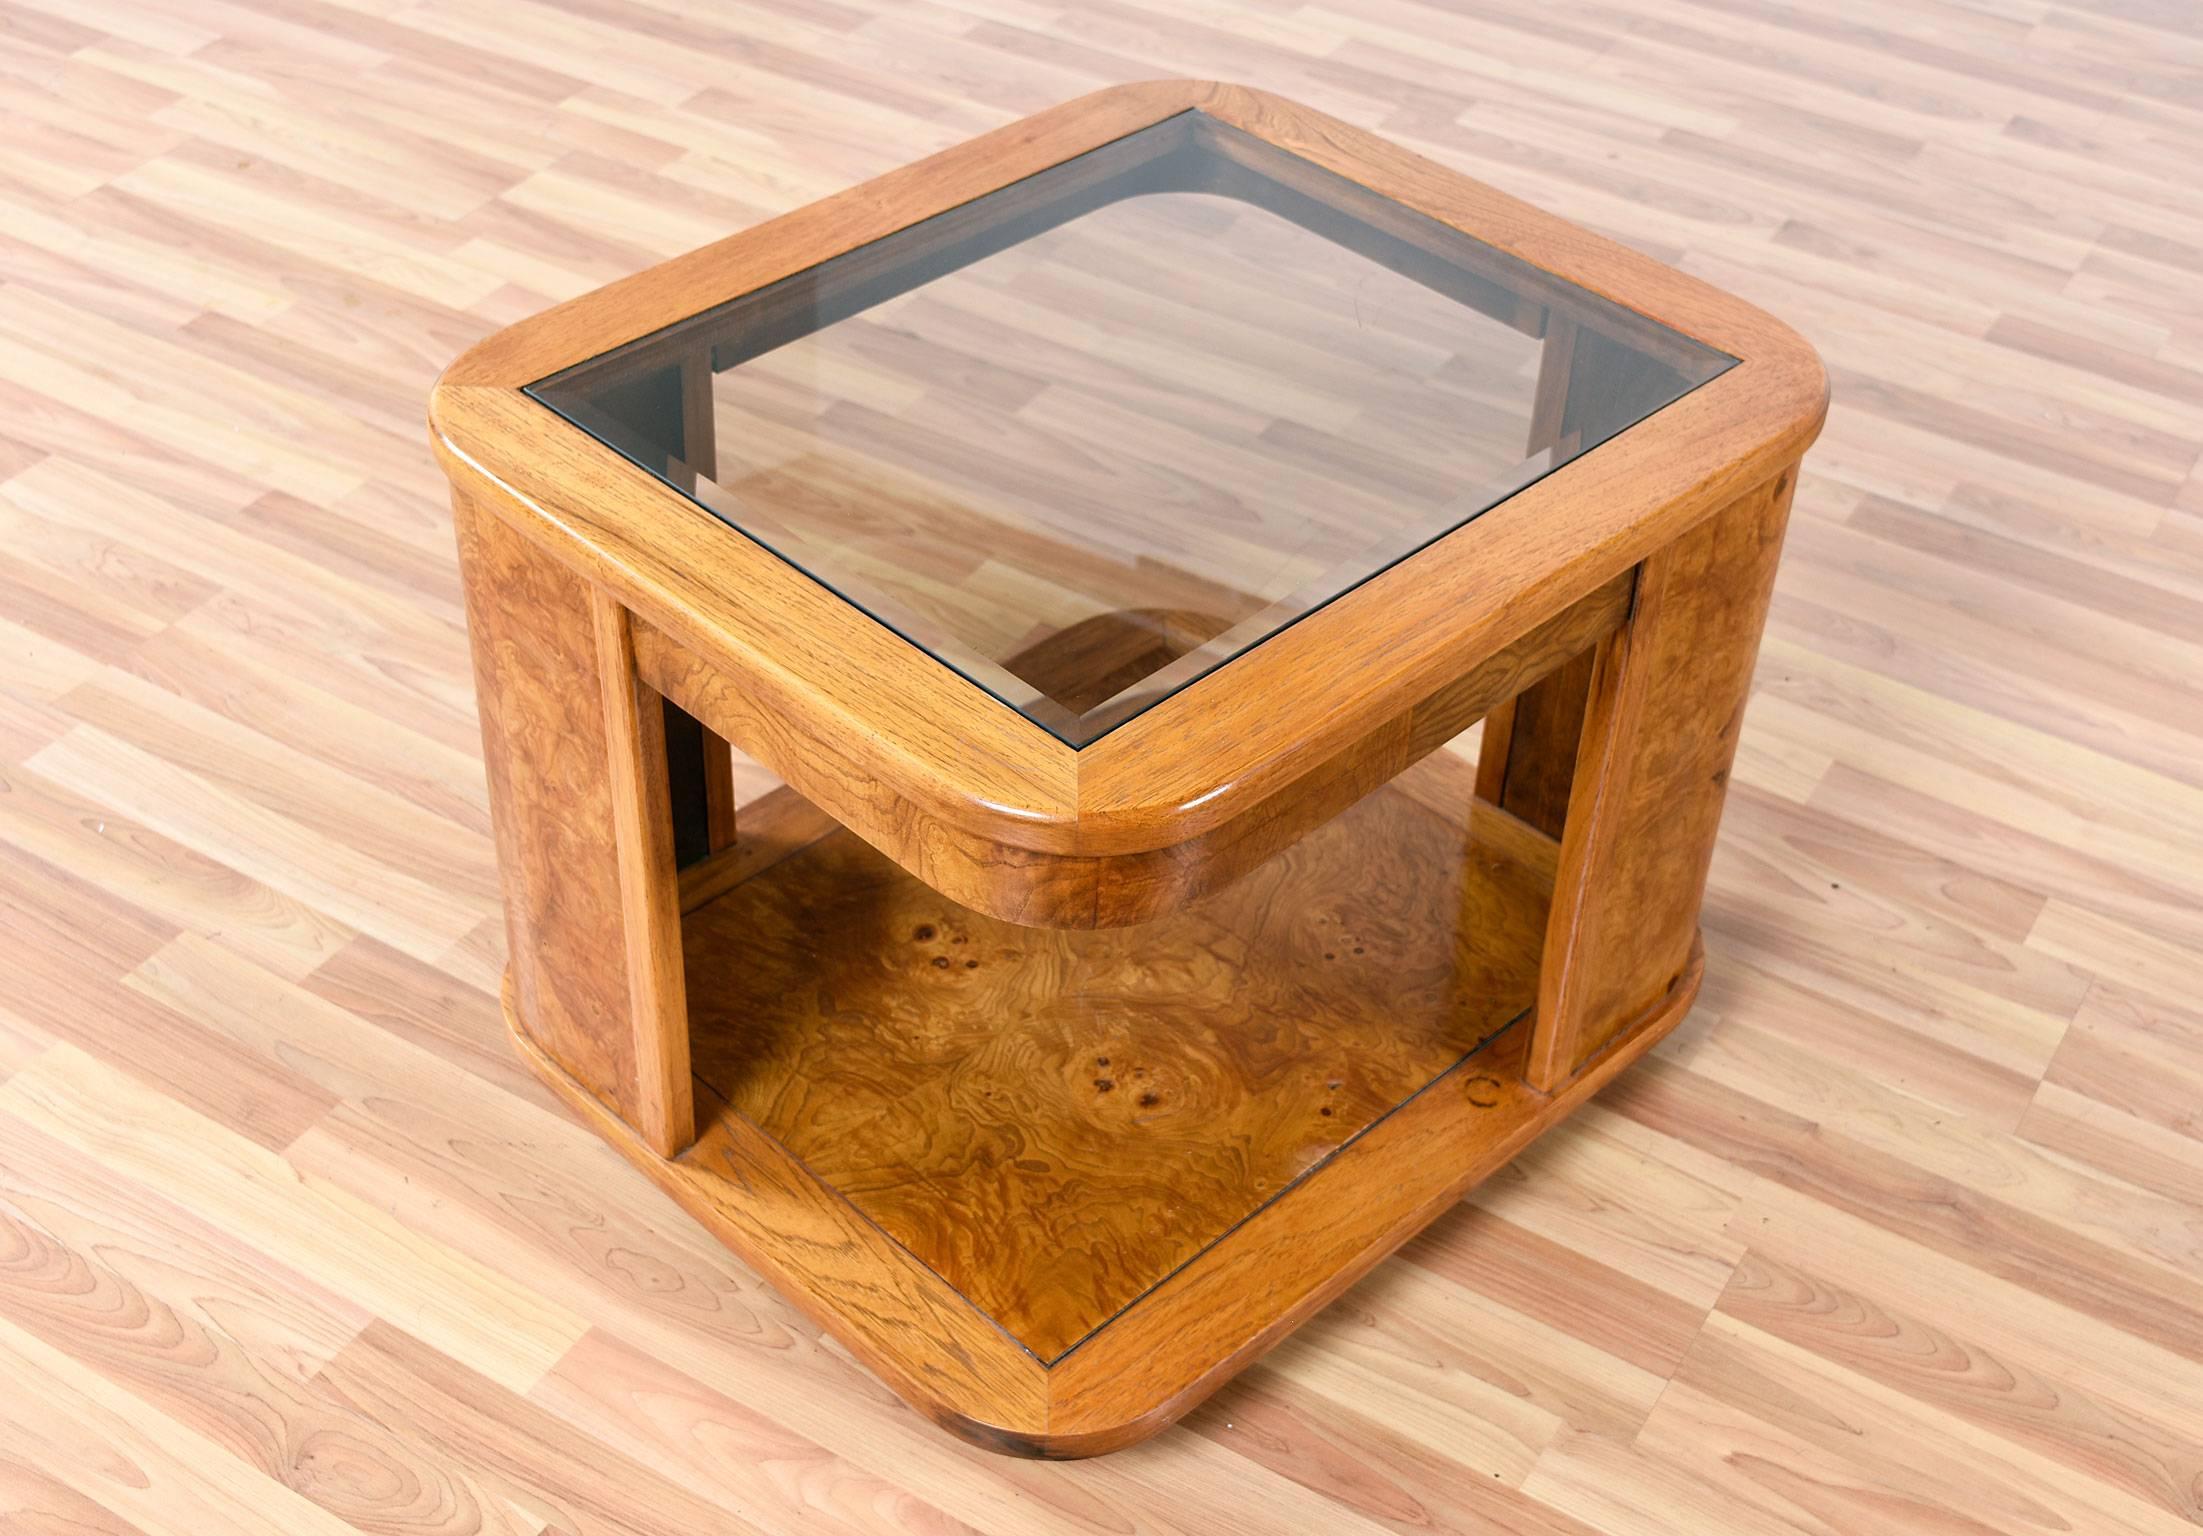 Postmodern burl wood end table with a smoked glass top and storage underneath. The simplified yet elegant contoured lines create a lovely accent piece, while providing plenty of storage space.